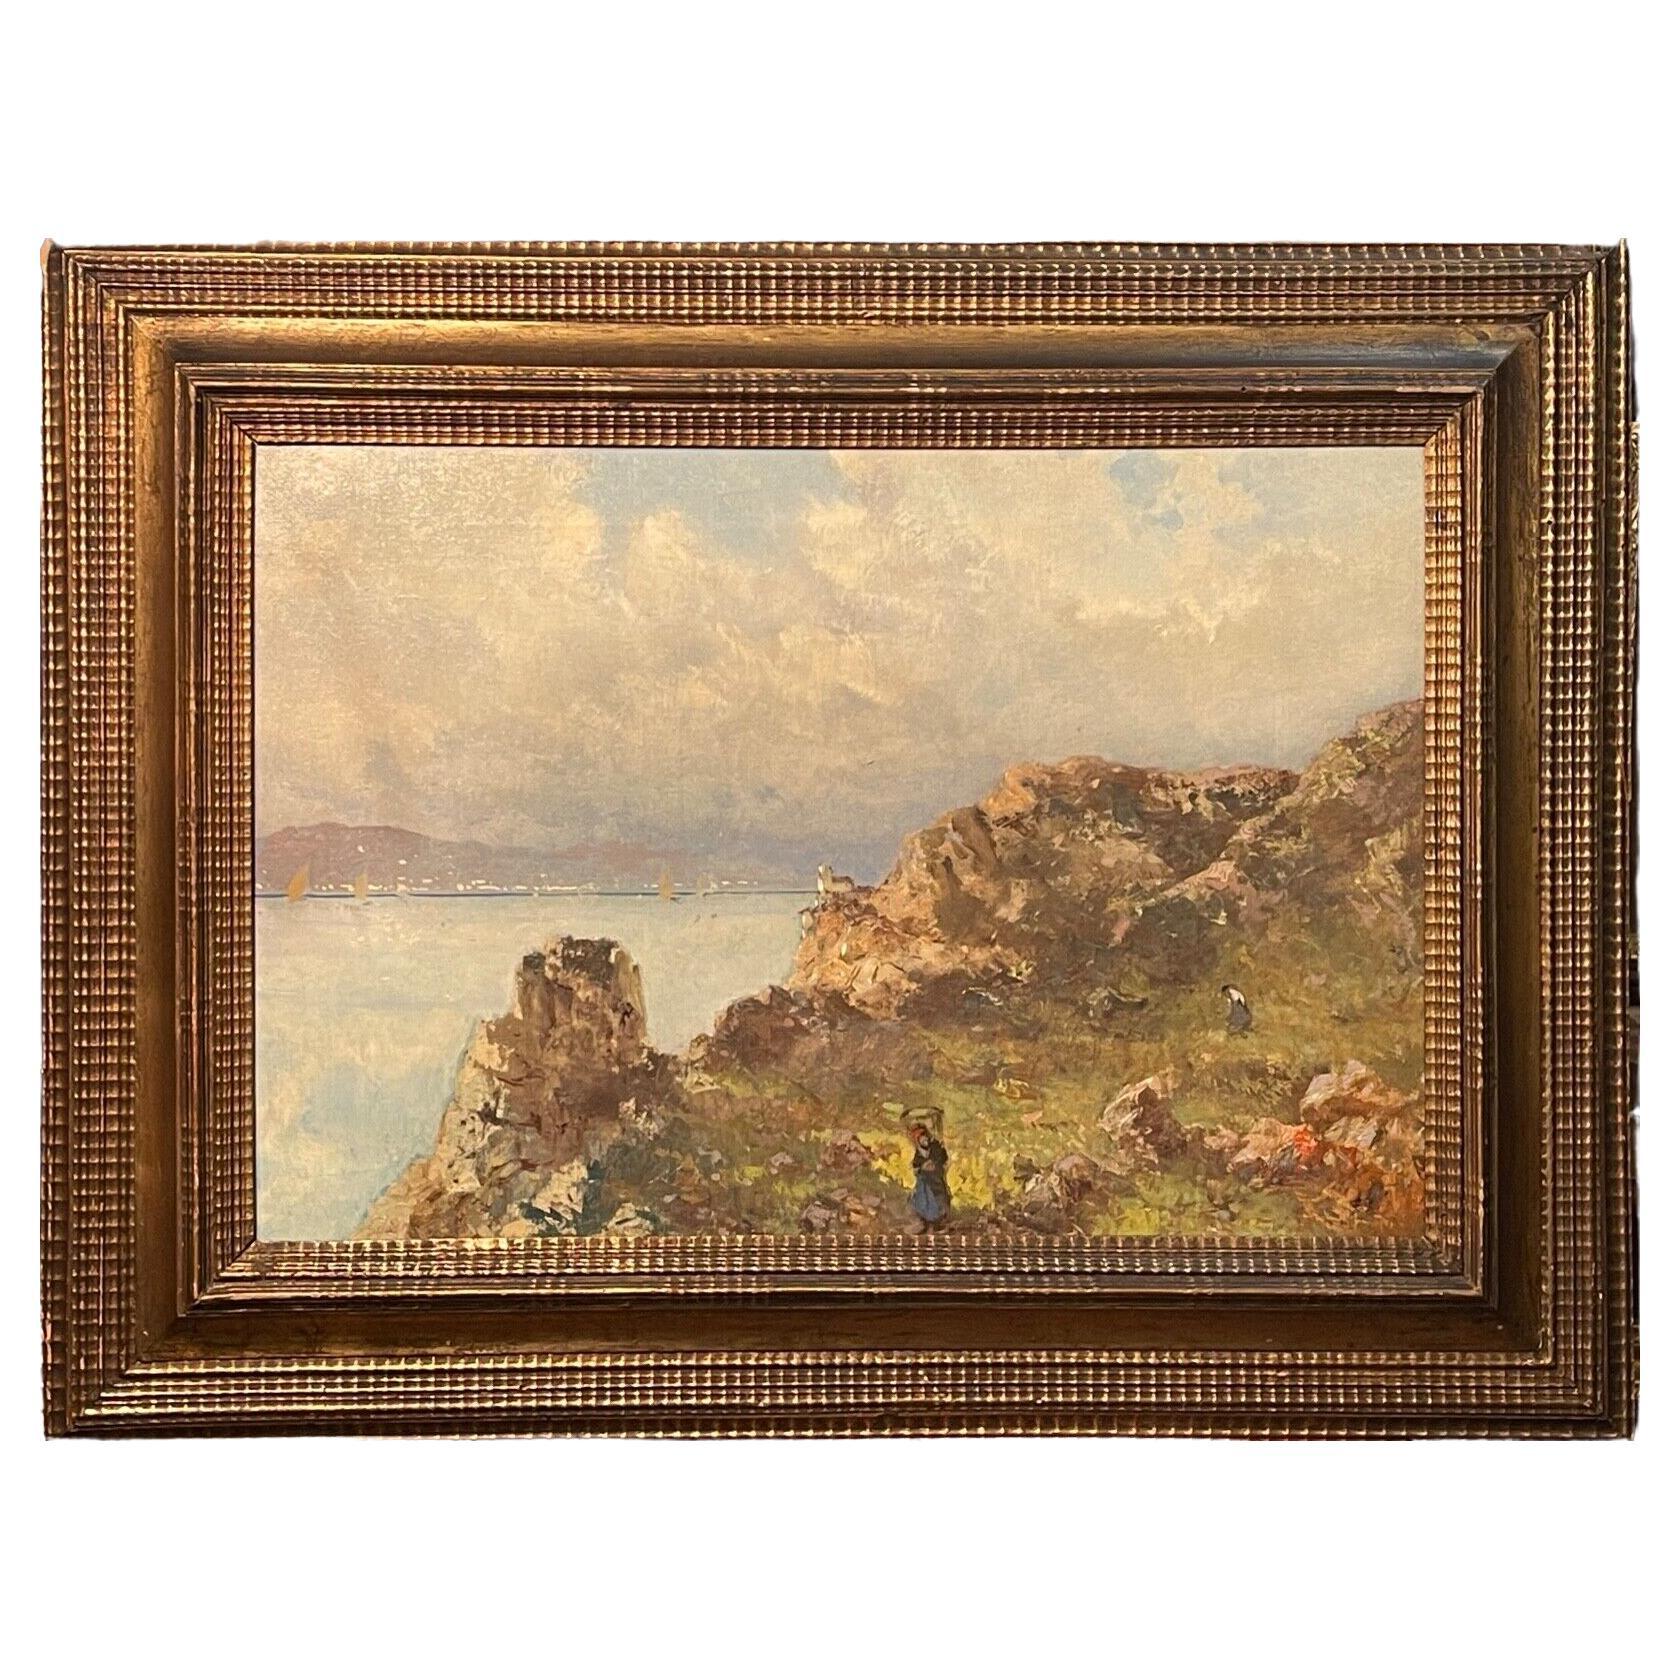 Ancient Painting, Oil on Canvas, L. Gignous, View from the High Coast, 19th Cent